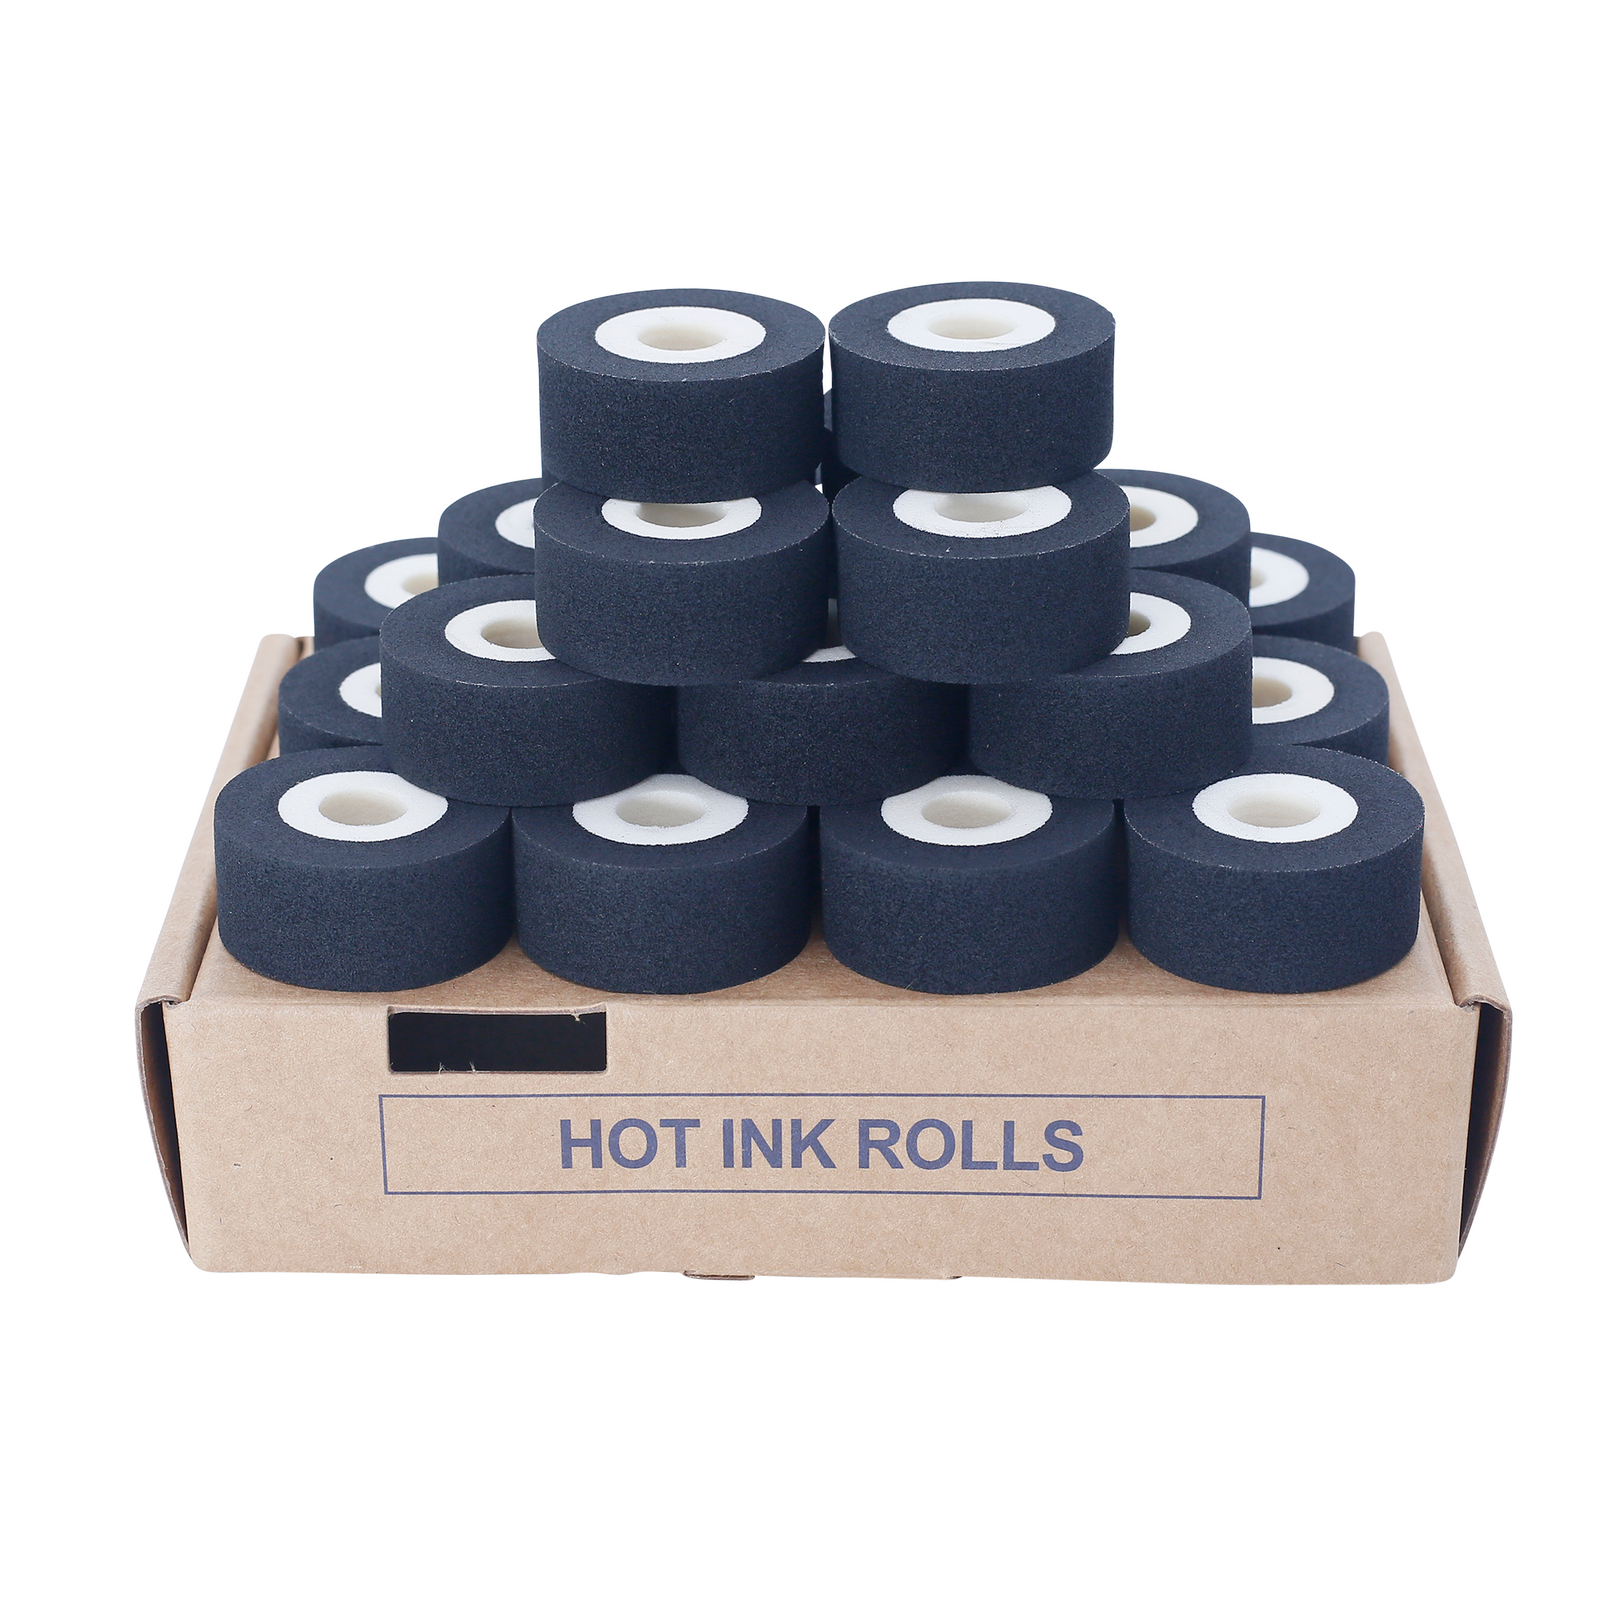 Pack of 24 rolls of 16mm black hot ink stamp rolls positioned on top of their original card box